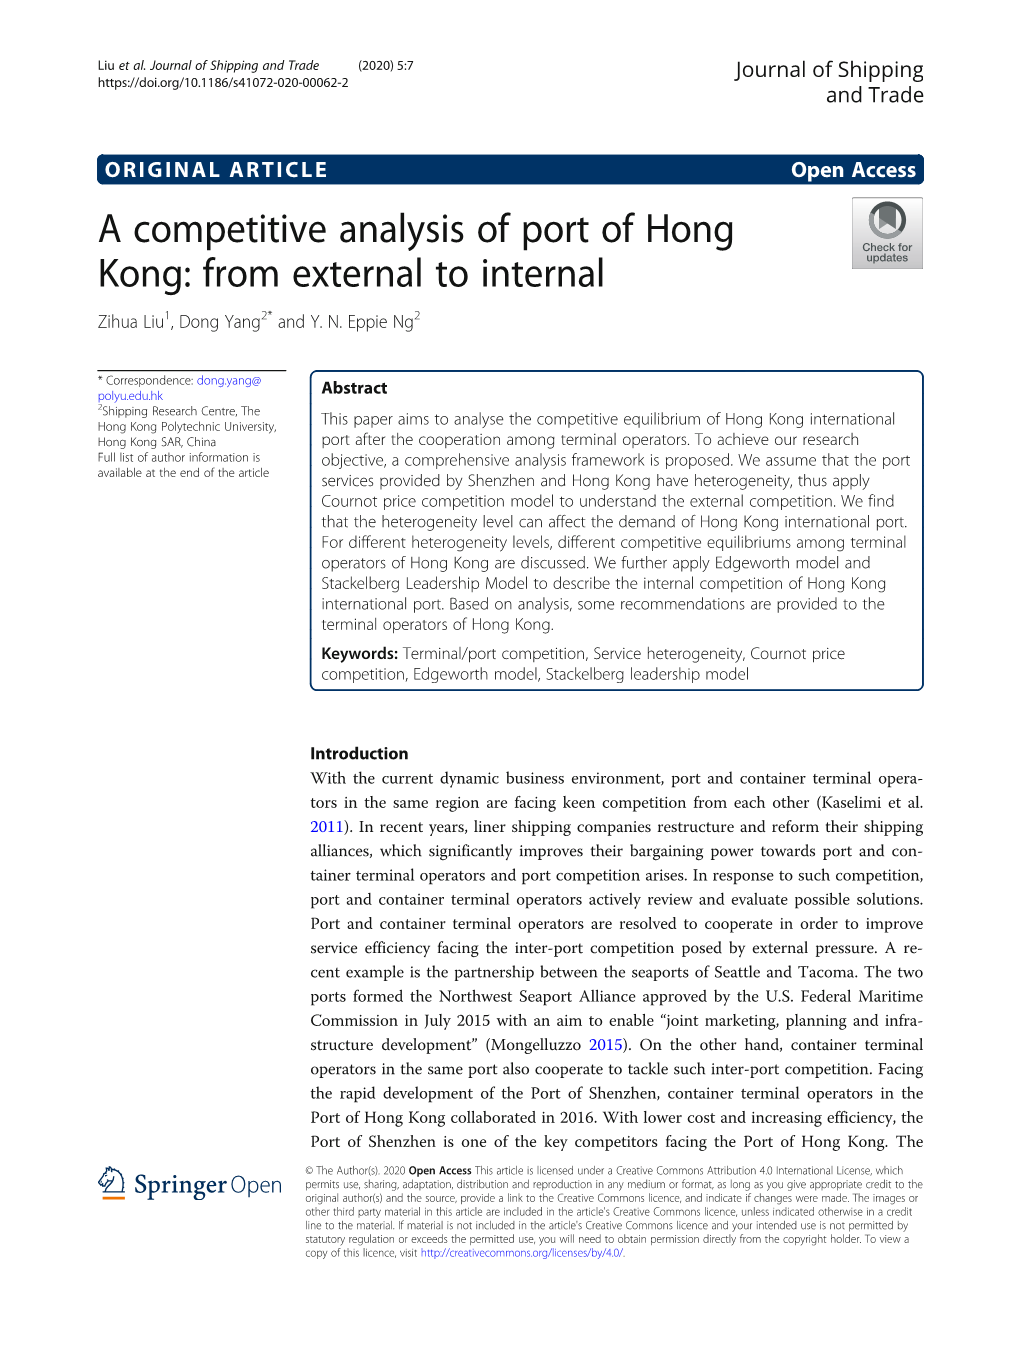 A Competitive Analysis of Port of Hong Kong: from External to Internal Zihua Liu1, Dong Yang2* and Y